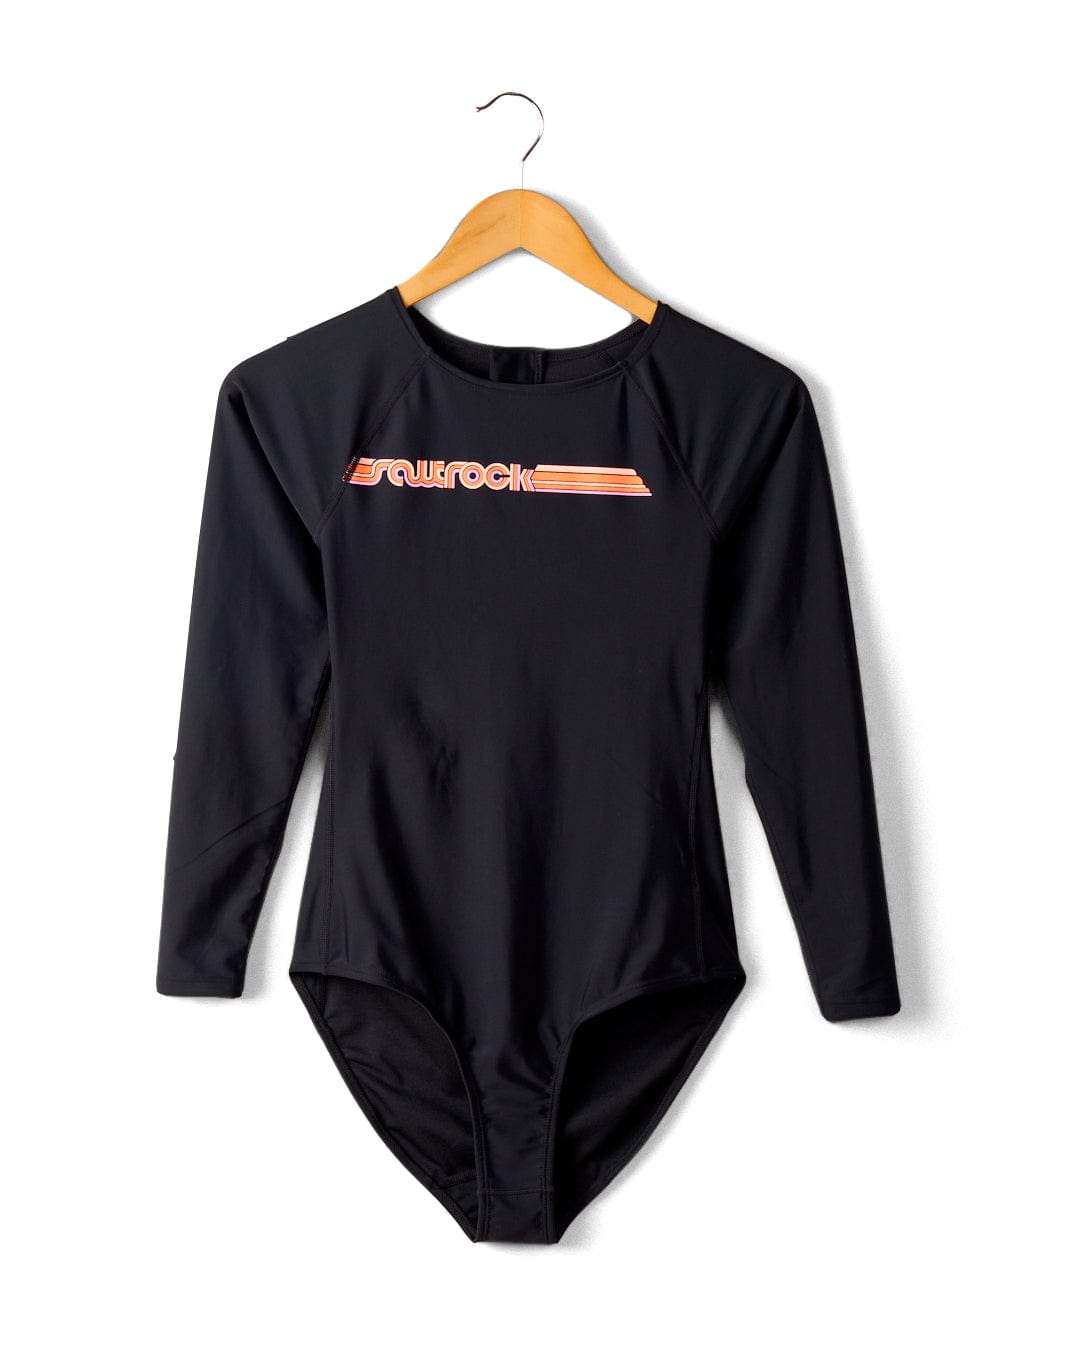 A Saltrock Cora Retro - Recycled Womens Long Sleeve Swimsuit in Dark Grey with 'surfrock' printed in orange and white on the chest, hanging on a wooden hanger against a white wall.